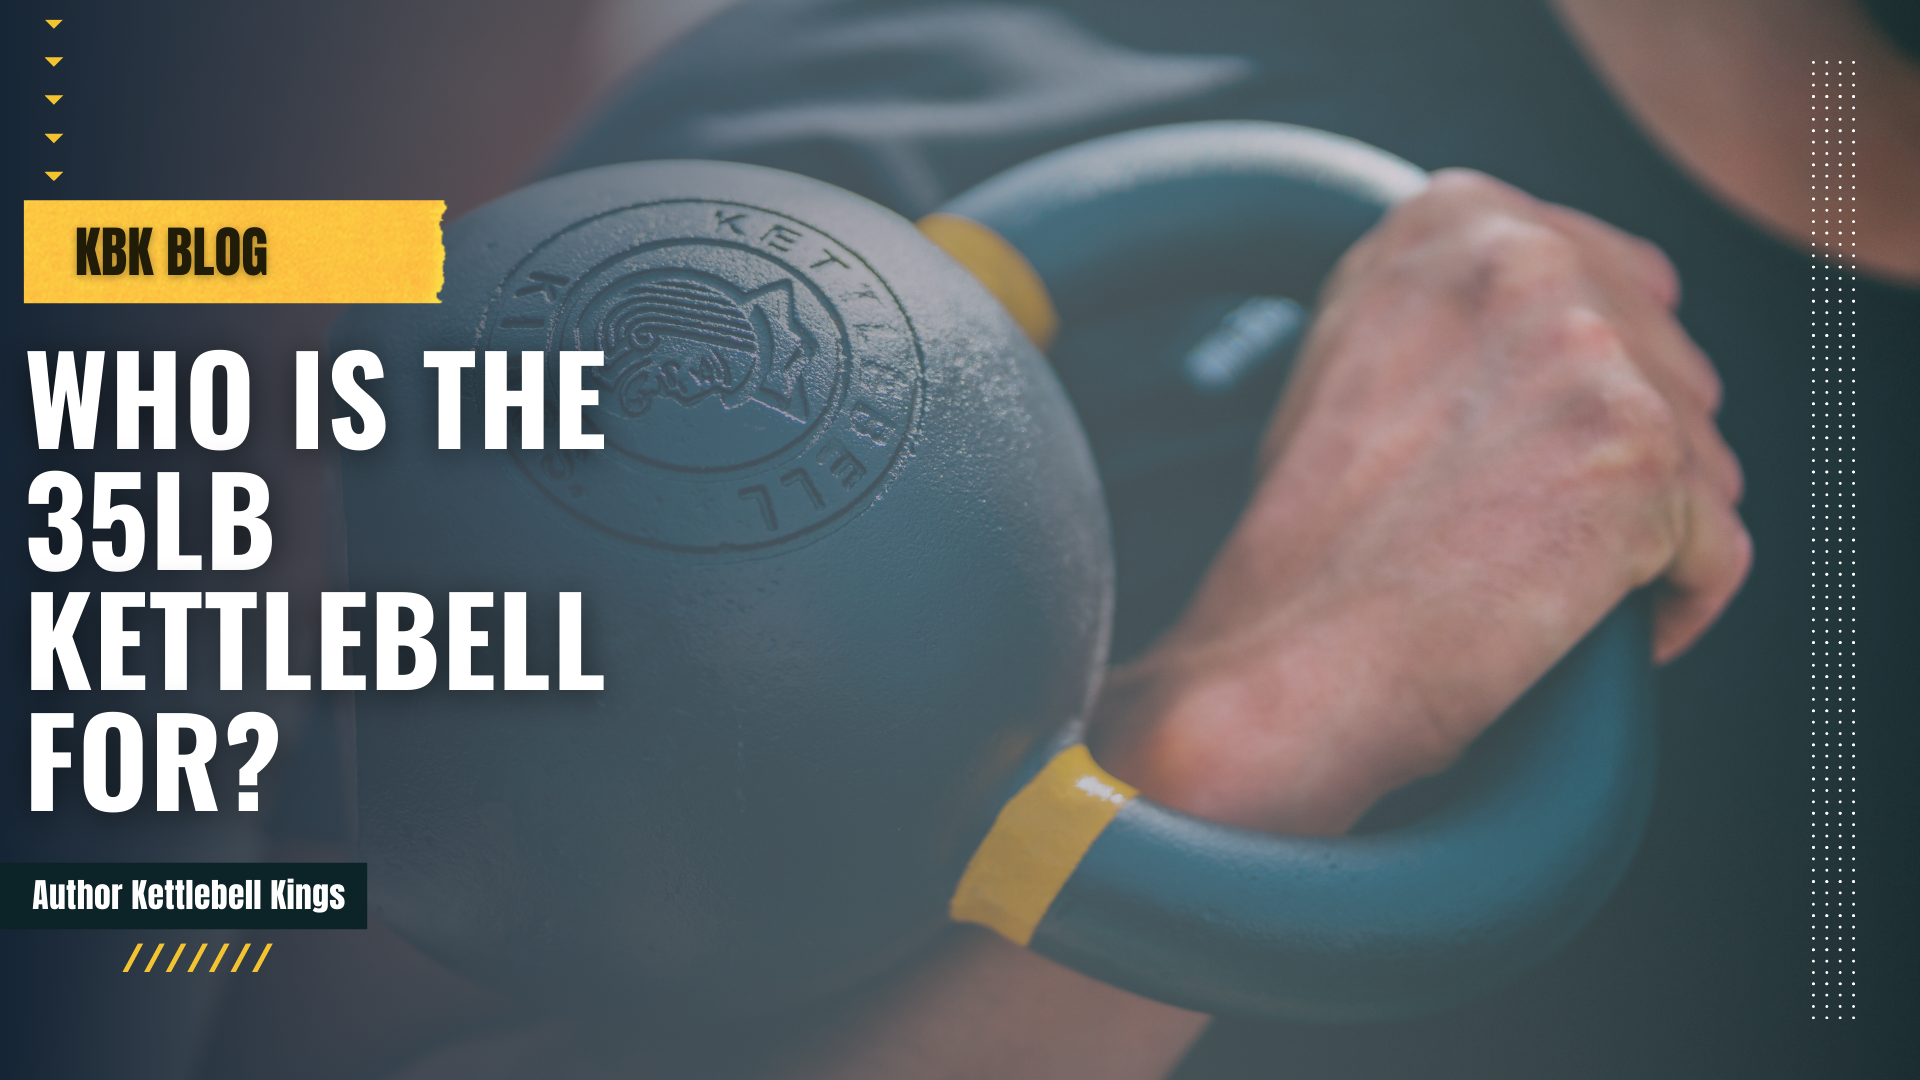 Who is The 35LB Kettlebell For?